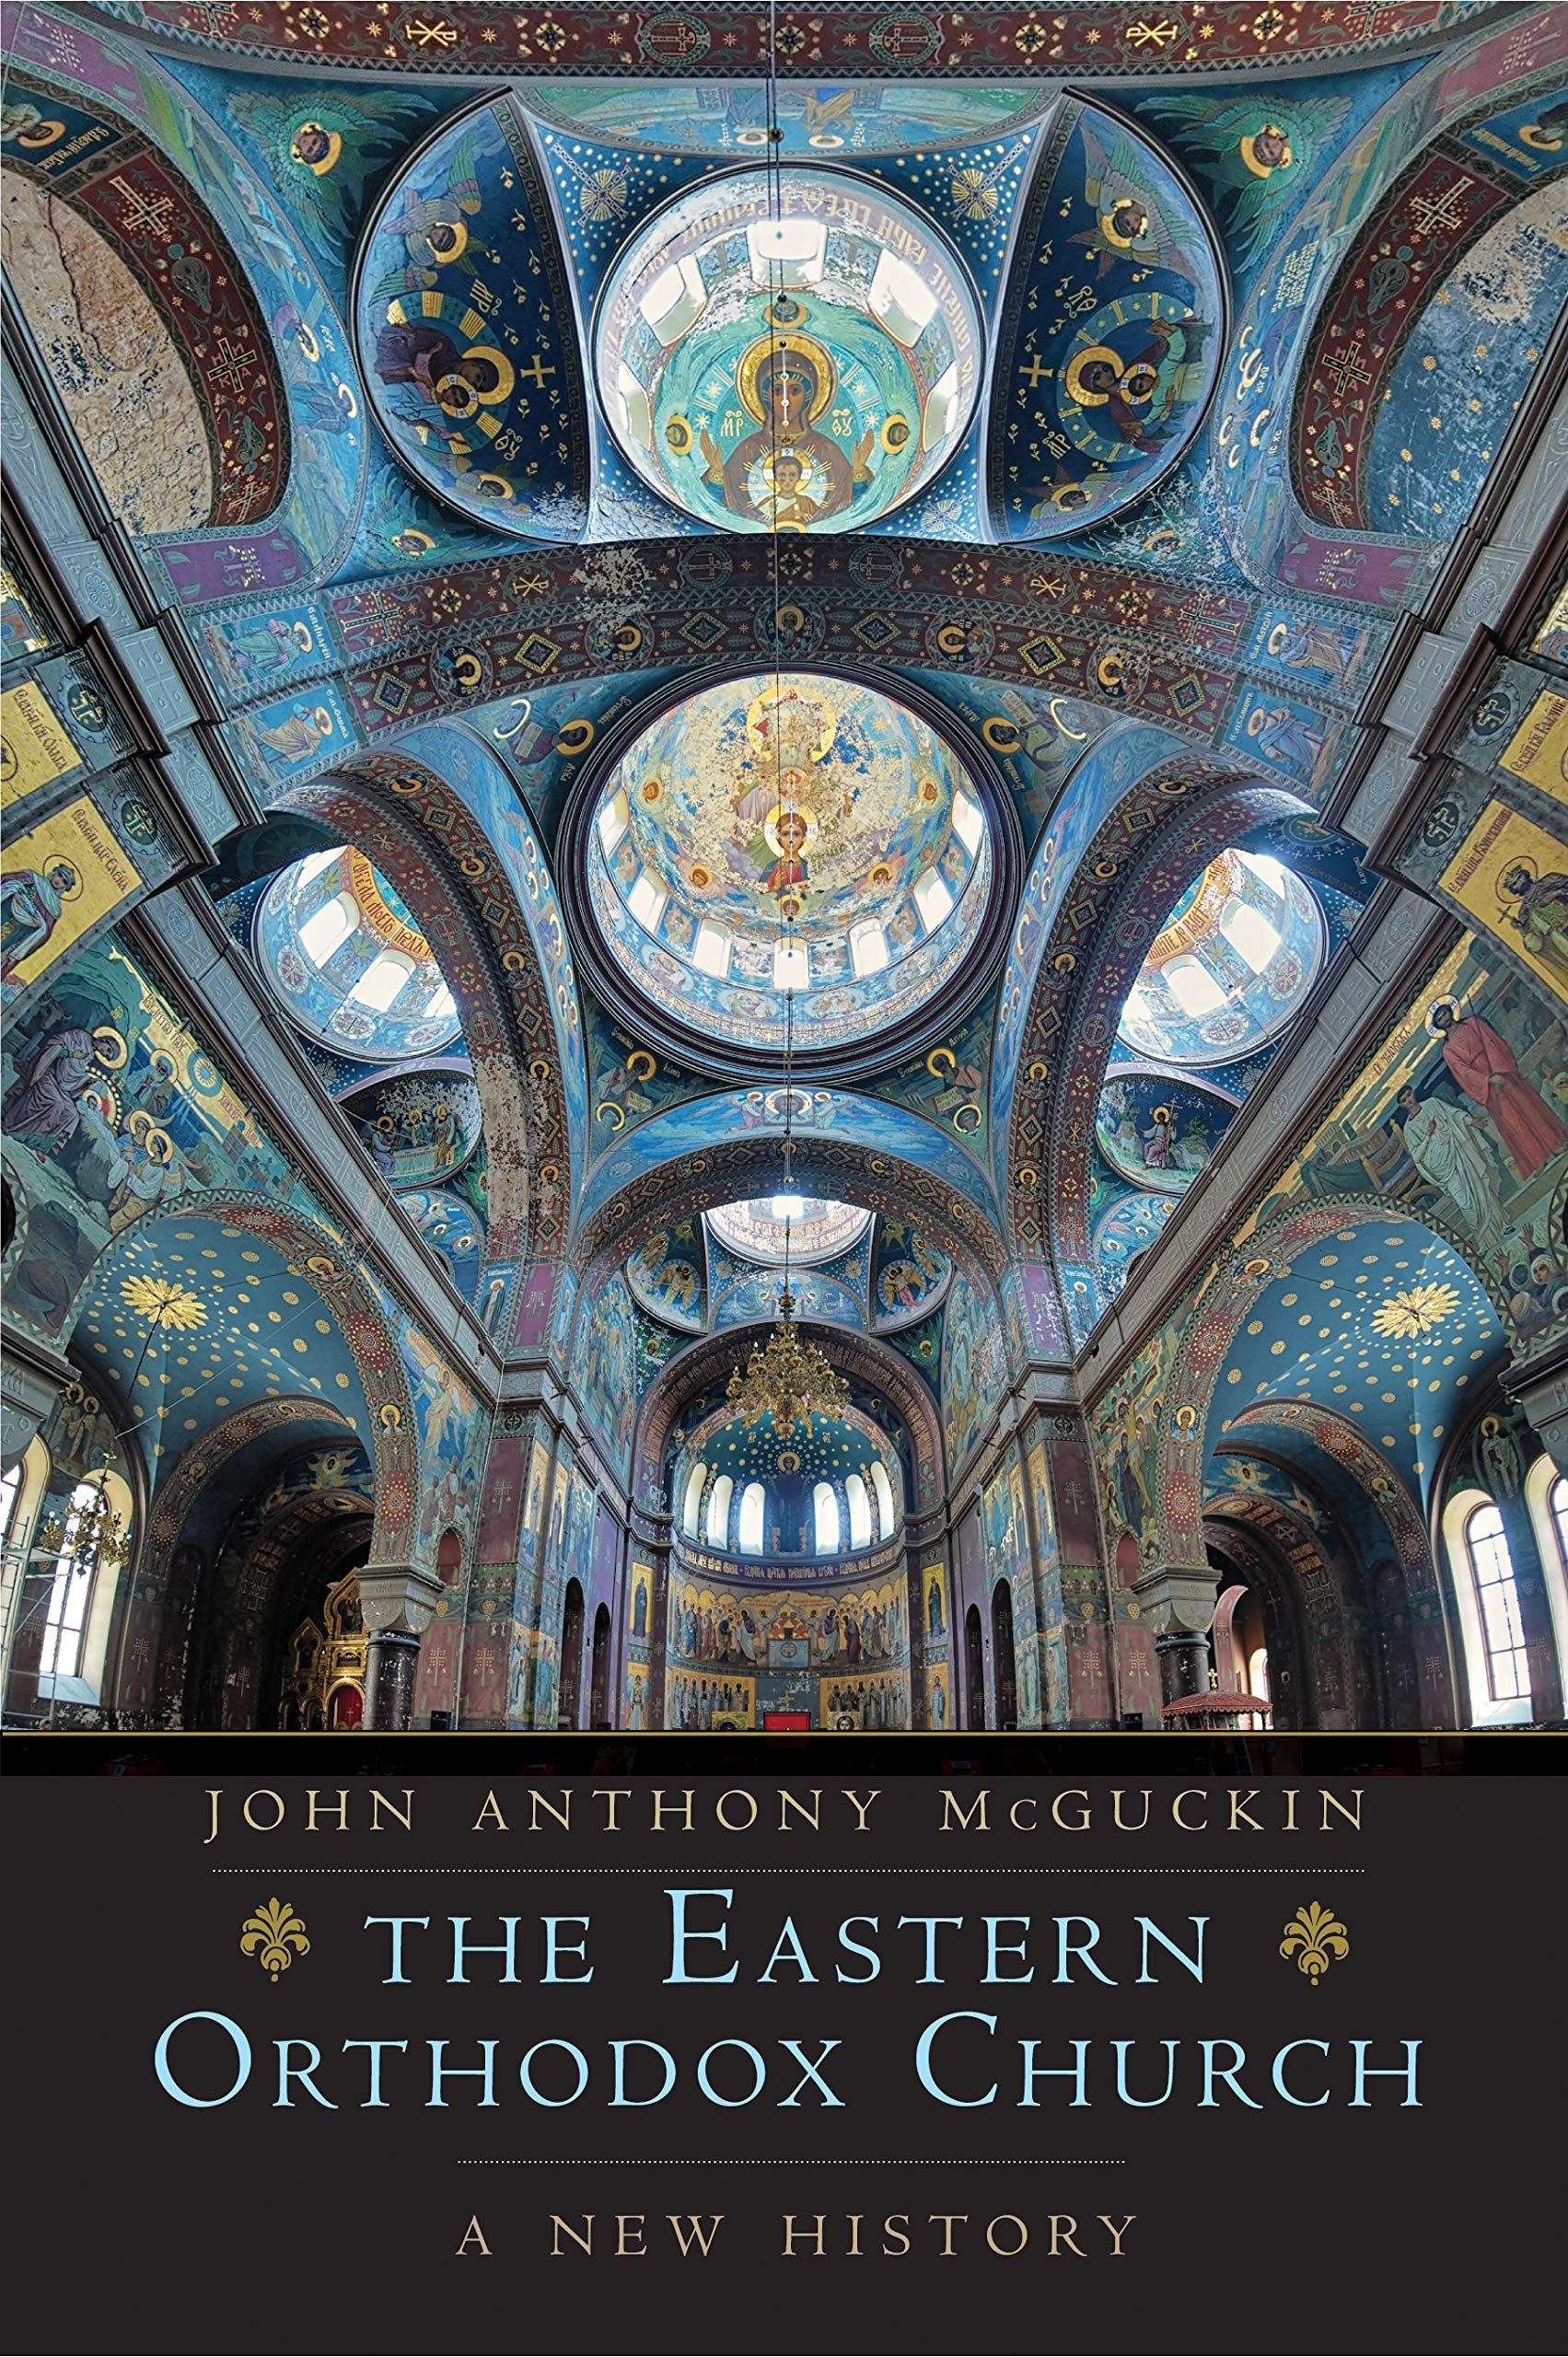 The One and Only: Andrew Louth on a New History of the Orthodox Church